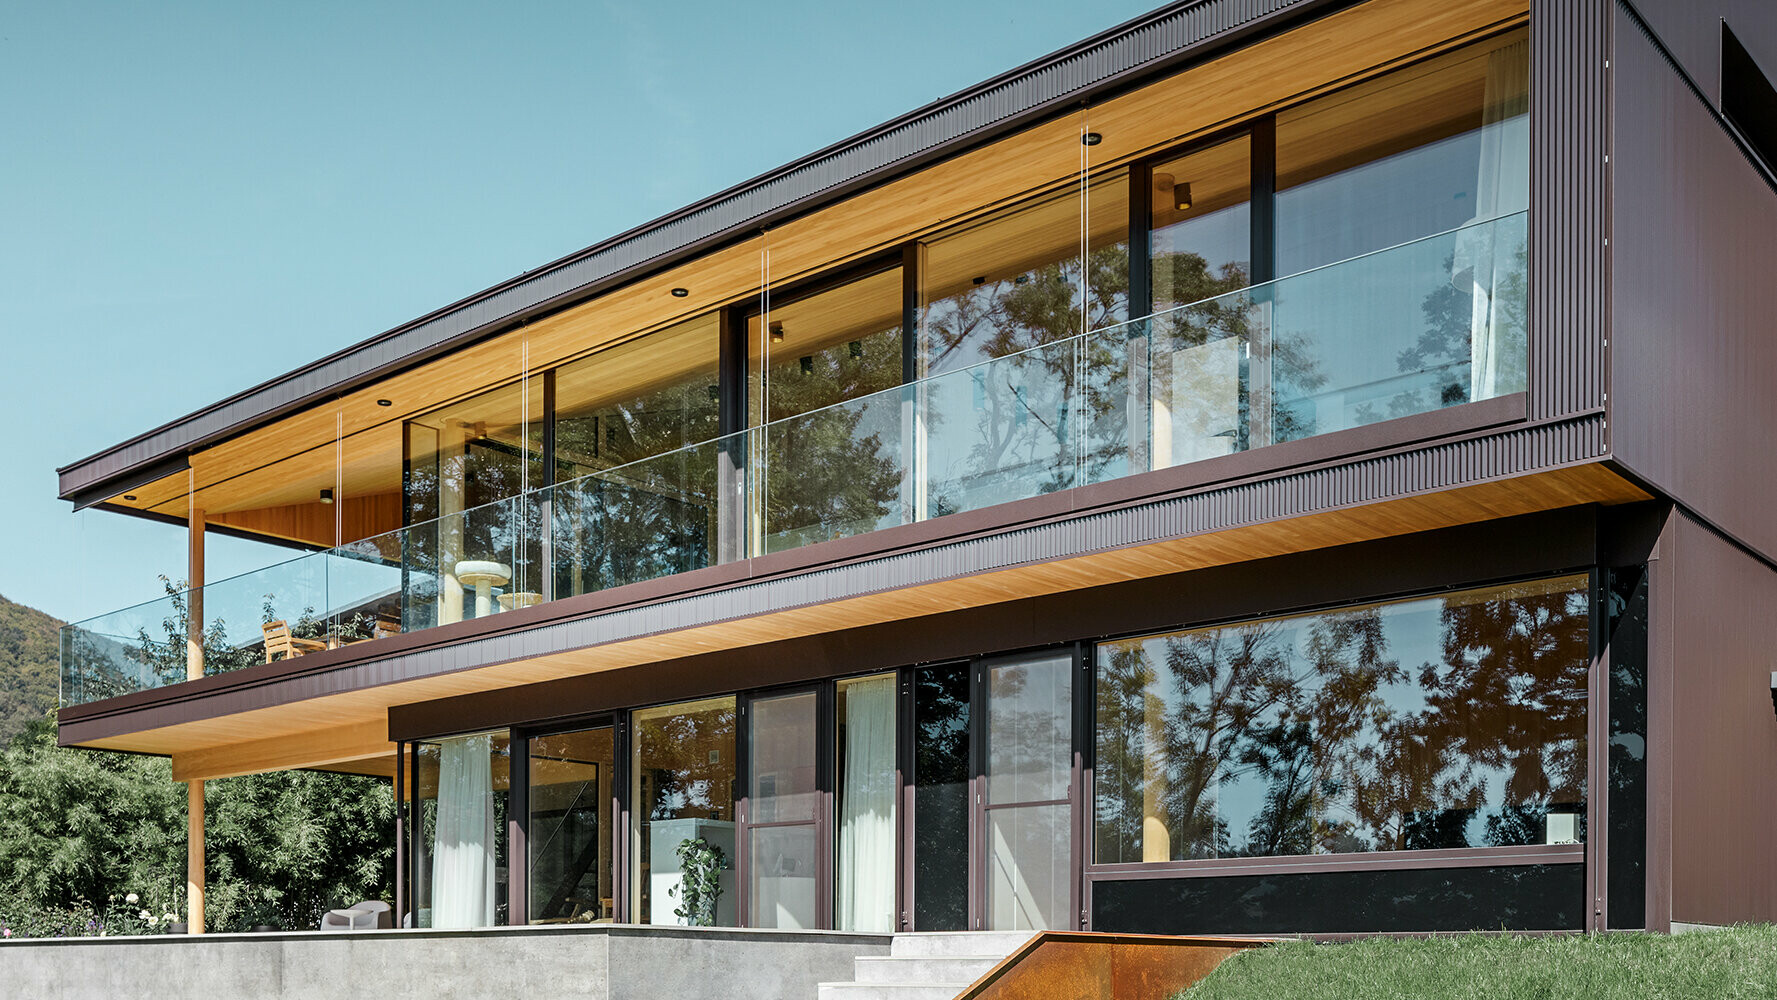 New detached house with large glass surfaces and brown aluminium façade